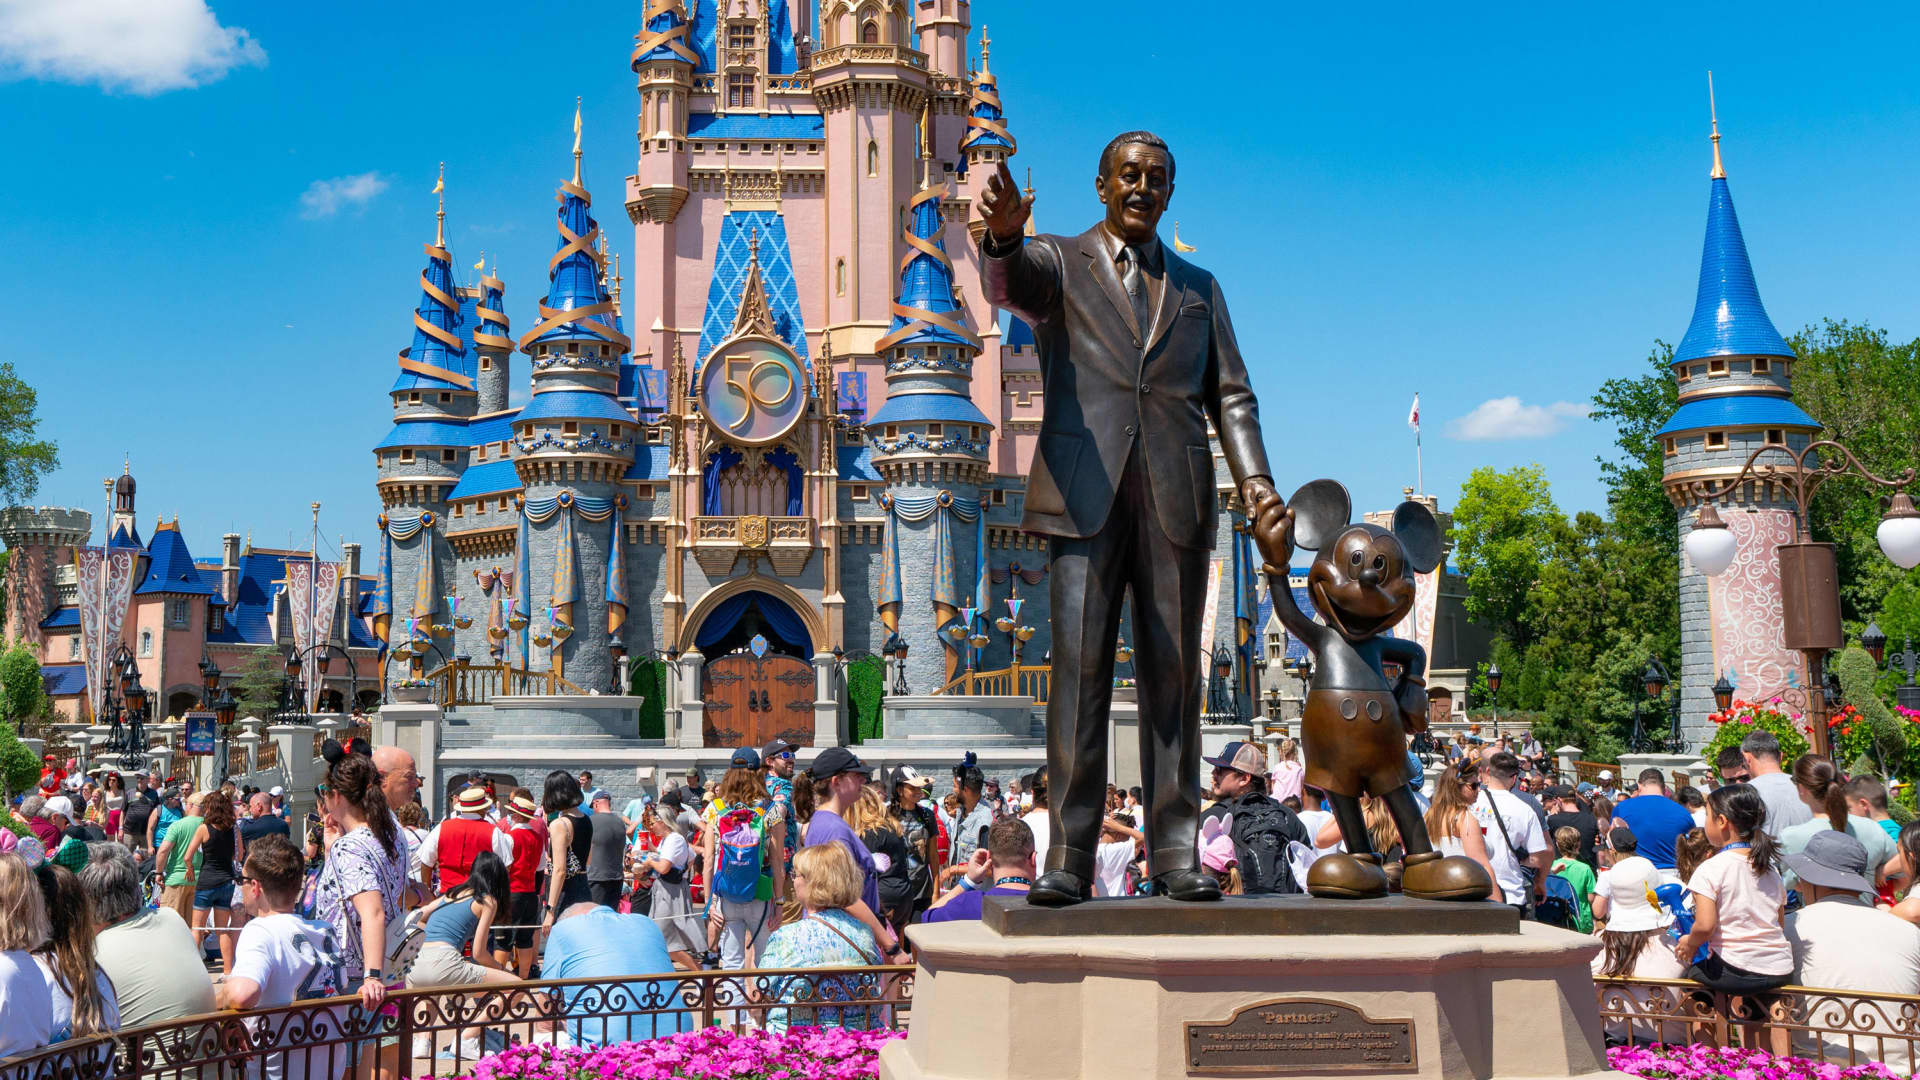 Disney plans to nearly double its investment in parks and cruises business